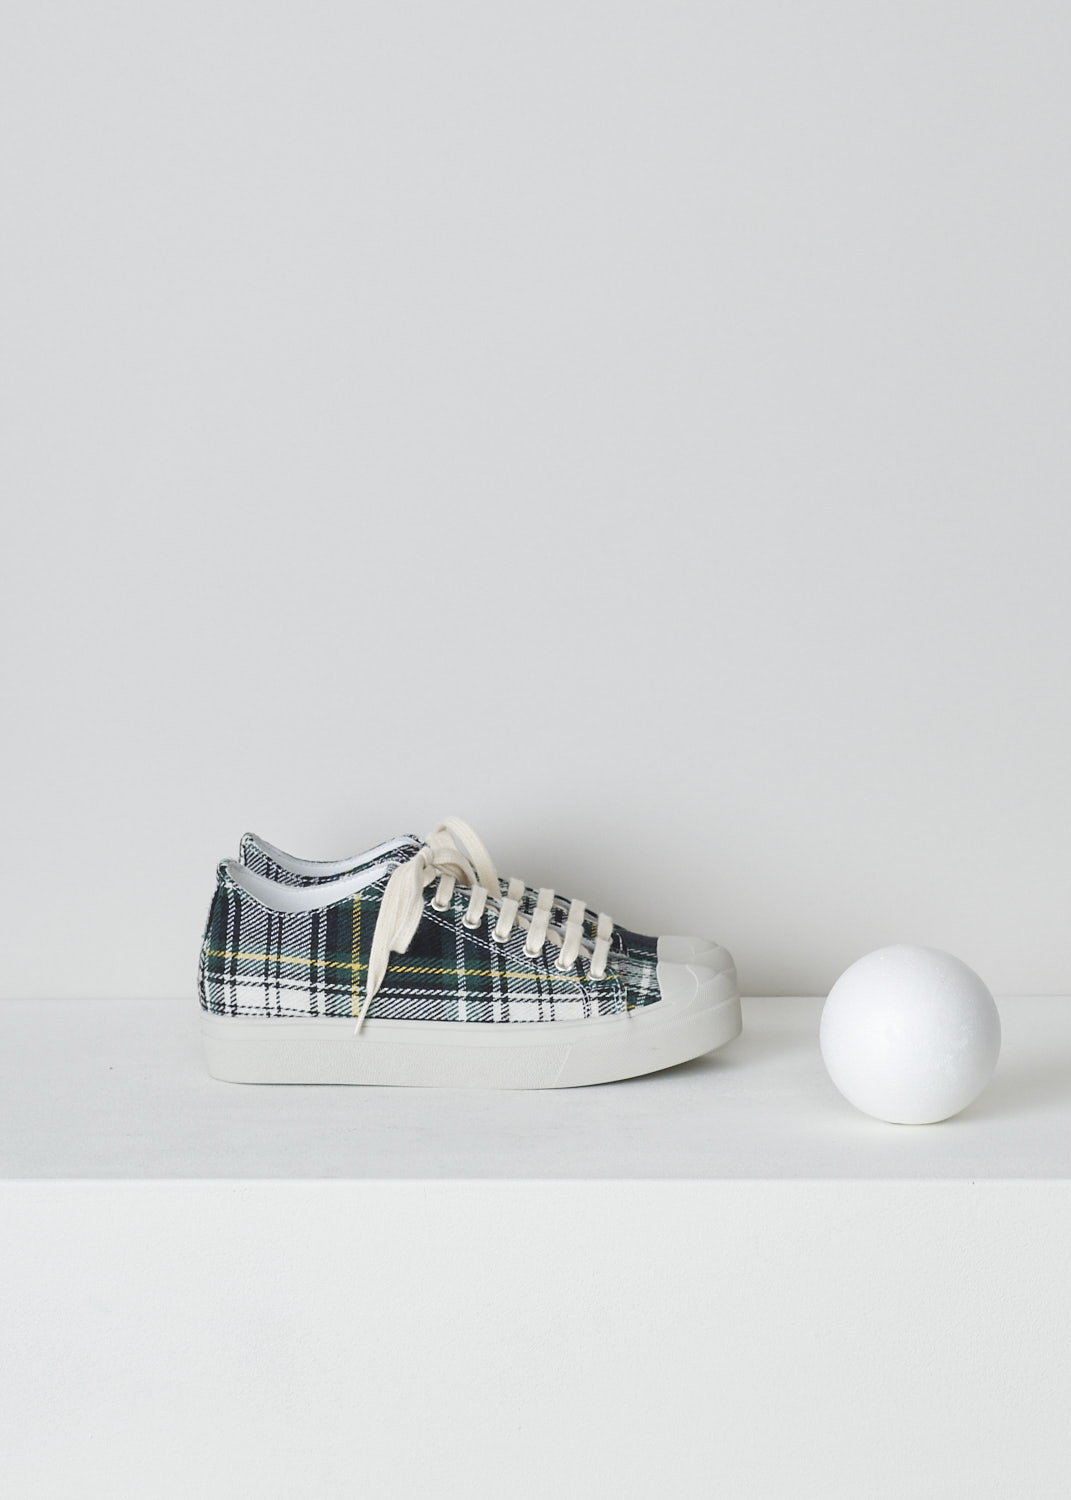 SOFIE Dâ€™HOORE, BLUE AND YELLOW TARTAN LOW TOP SNEAKERS, FOLK_WSCOT_TARTAN_3, Grey, Yellow, Print, Side, These low top sneakers with blue and yellow tartan print feature front lace-up fastening with white laces. These sneakers have a round toe with a white rubber toe cap. These shoes have white rubber soles.
 
